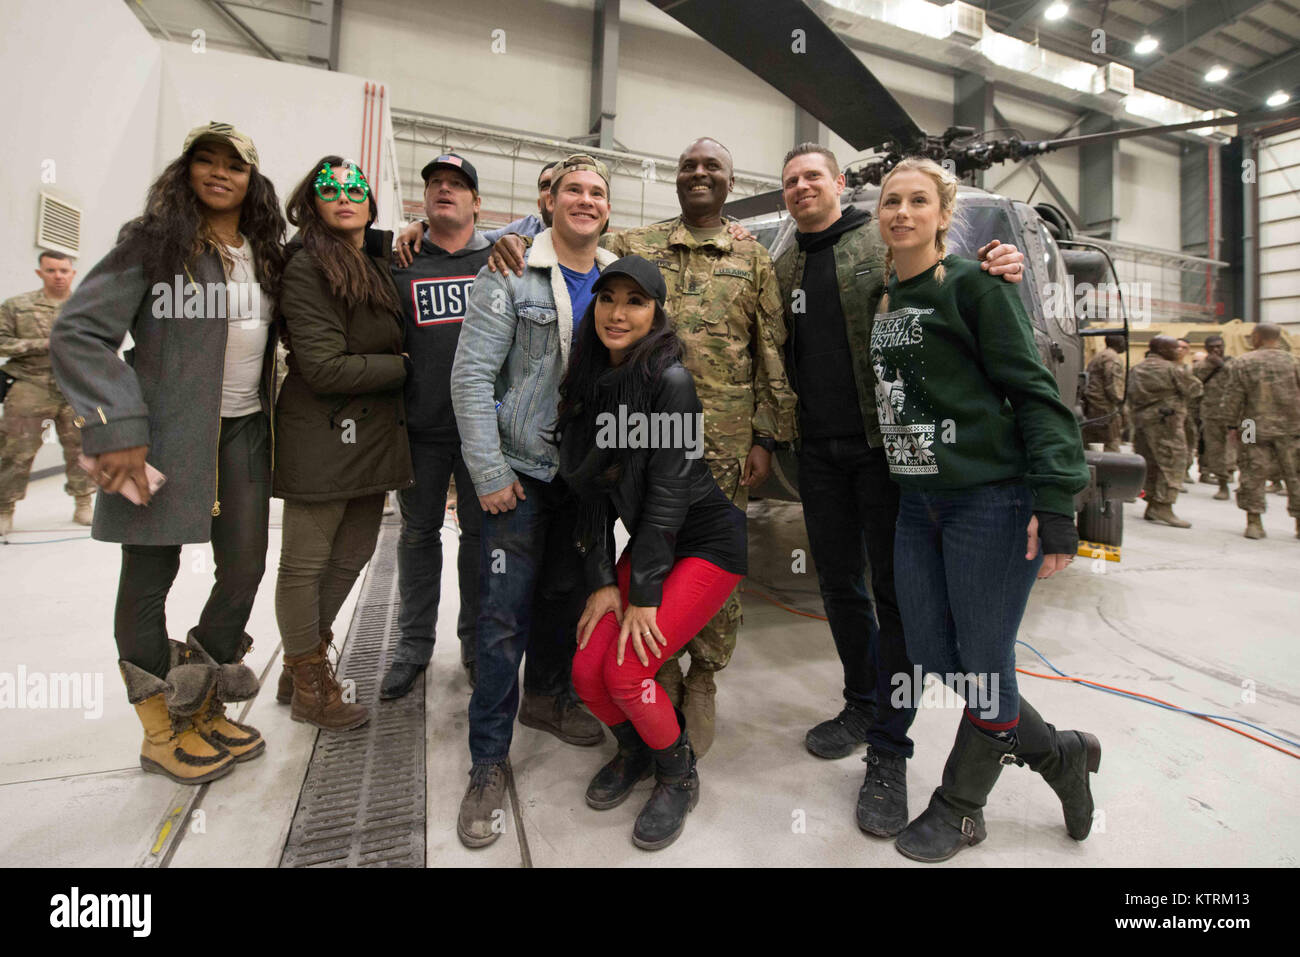 World Wrestling Entertainment (WWE) wrestler Alicia Fox, country music singer Jerrod Niemann, actor Adam Devine, wrestlers Gail Kim and and The Miz (Michael Mizanin), and comedian Iliza Shlesinger pose for a group photo during the USO Holiday Tour at the Bagram Airfield December 24, 2017 in Bagram, Afghanistan. Stock Photo